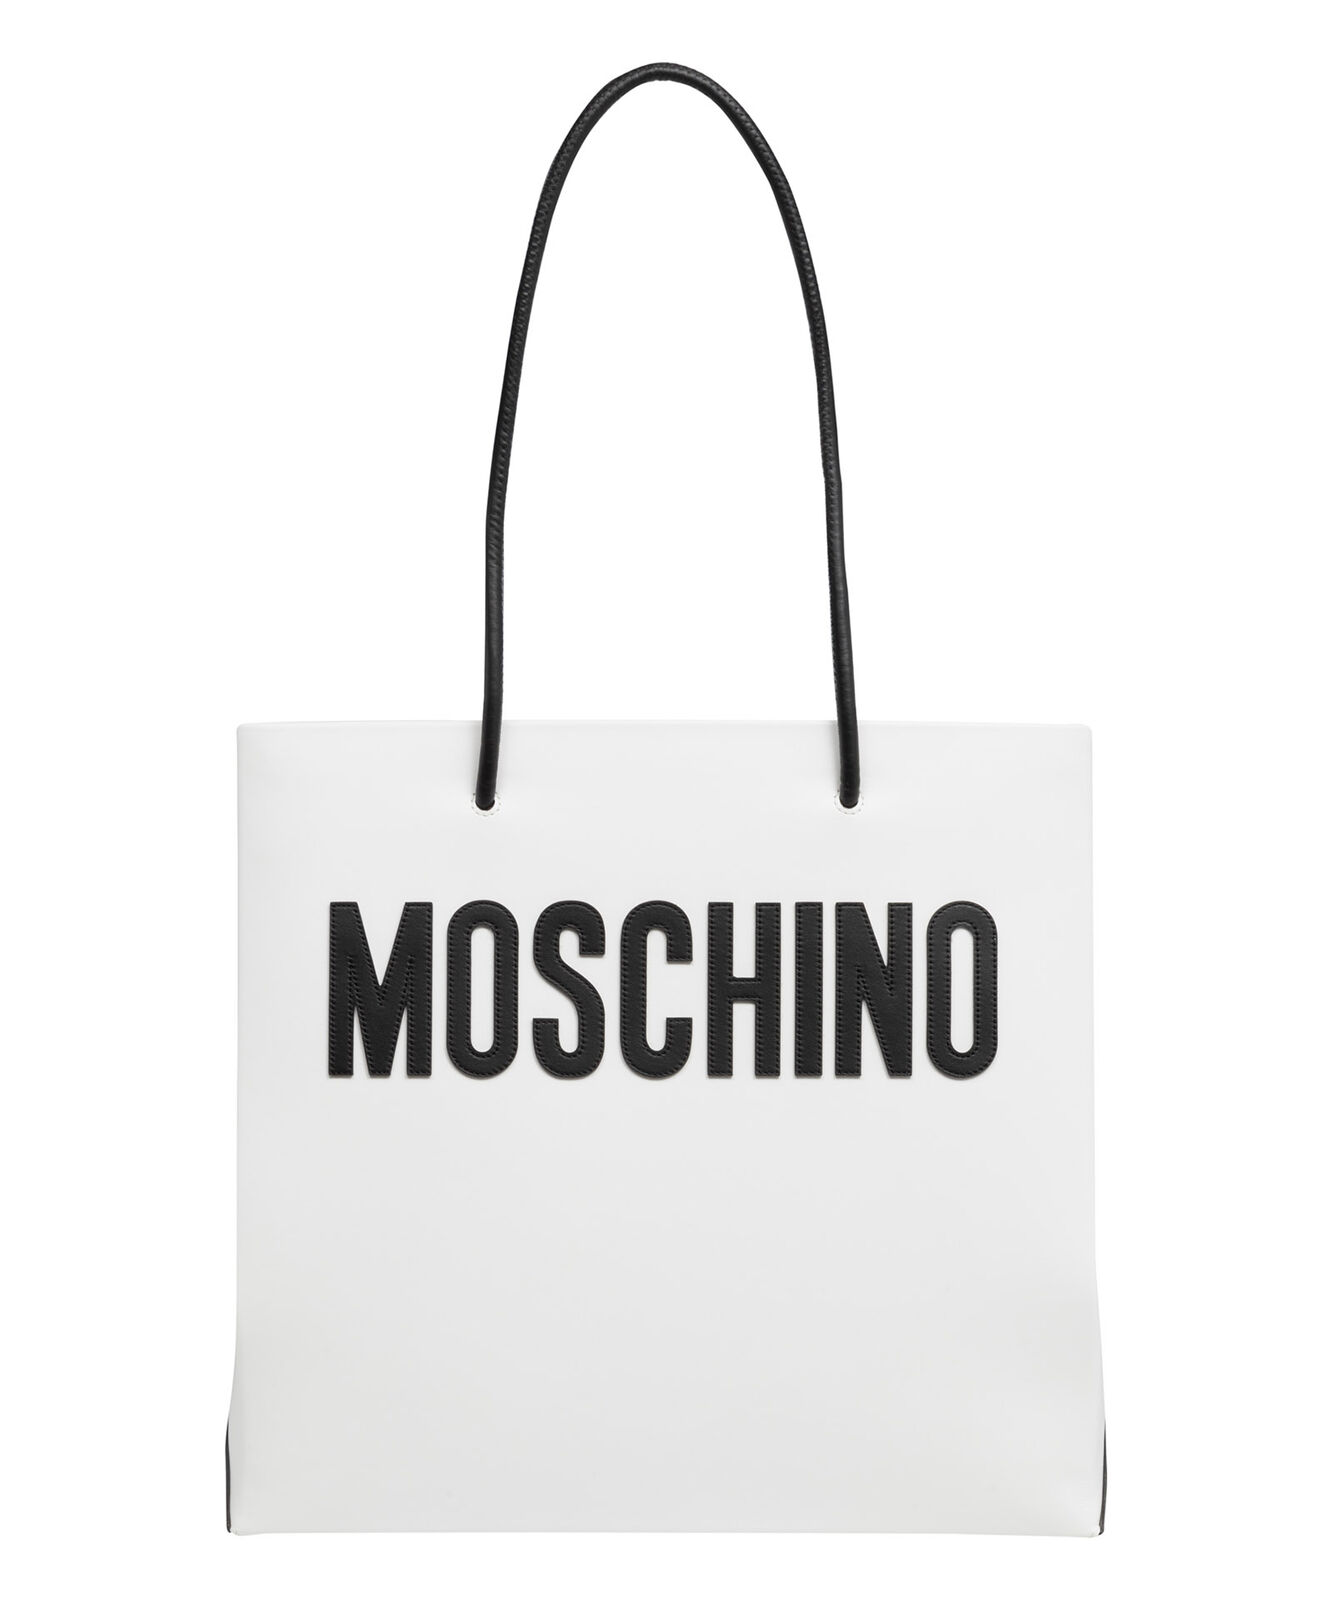 Pre-owned Moschino Tote Bag Women Logo 2412a756180015001 White - Black Big Leather